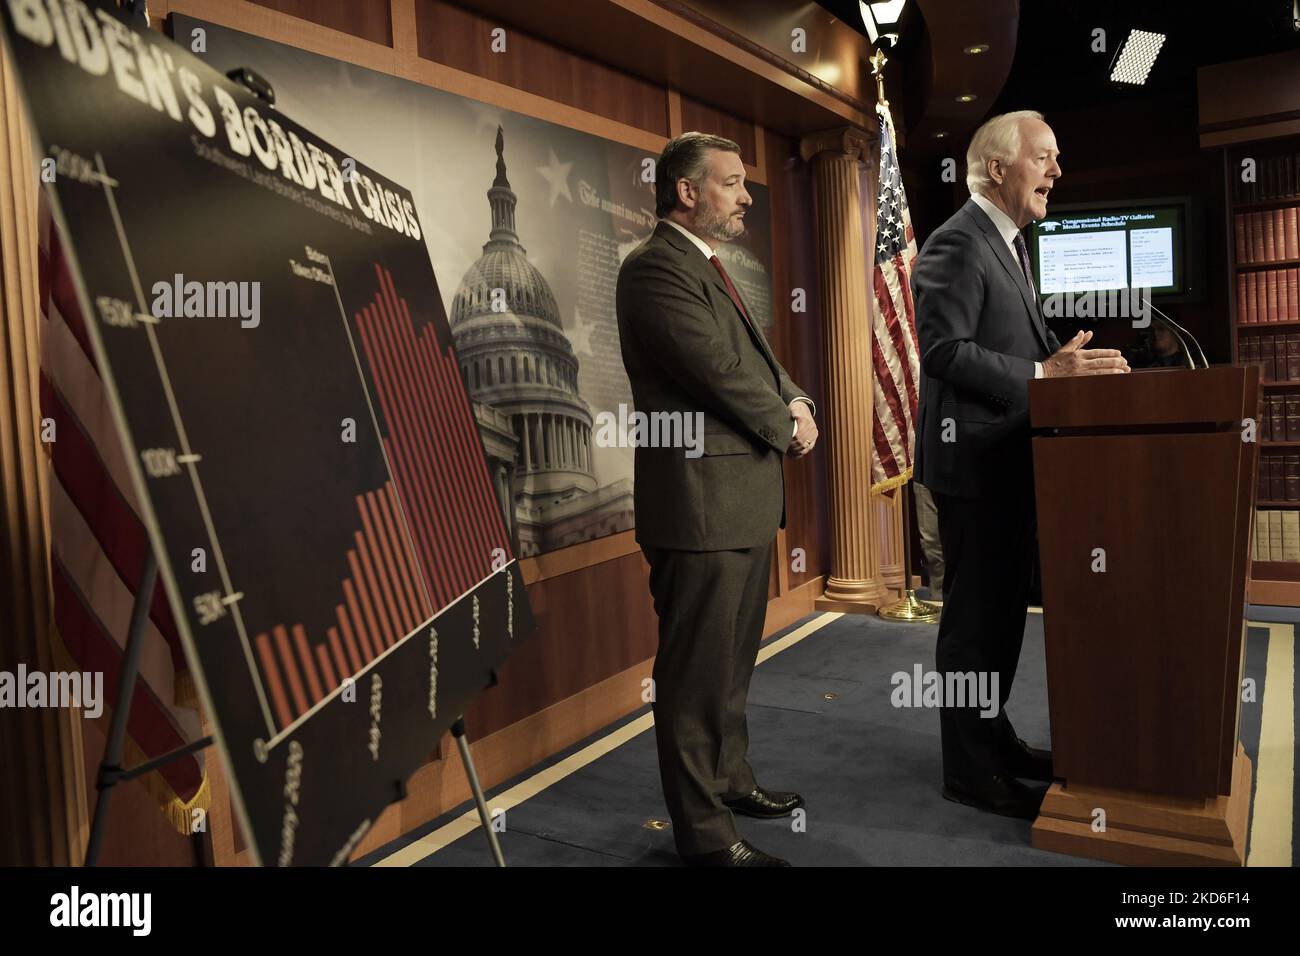 Senator John Cornyn(R-TX) alongside GOP members speaks about US-MX border during a press conference, today on March 30, 2022 at SVC/Capitol Hill in Washington DC, USA. (Photo by Lenin Nolly/NurPhoto) Stock Photo